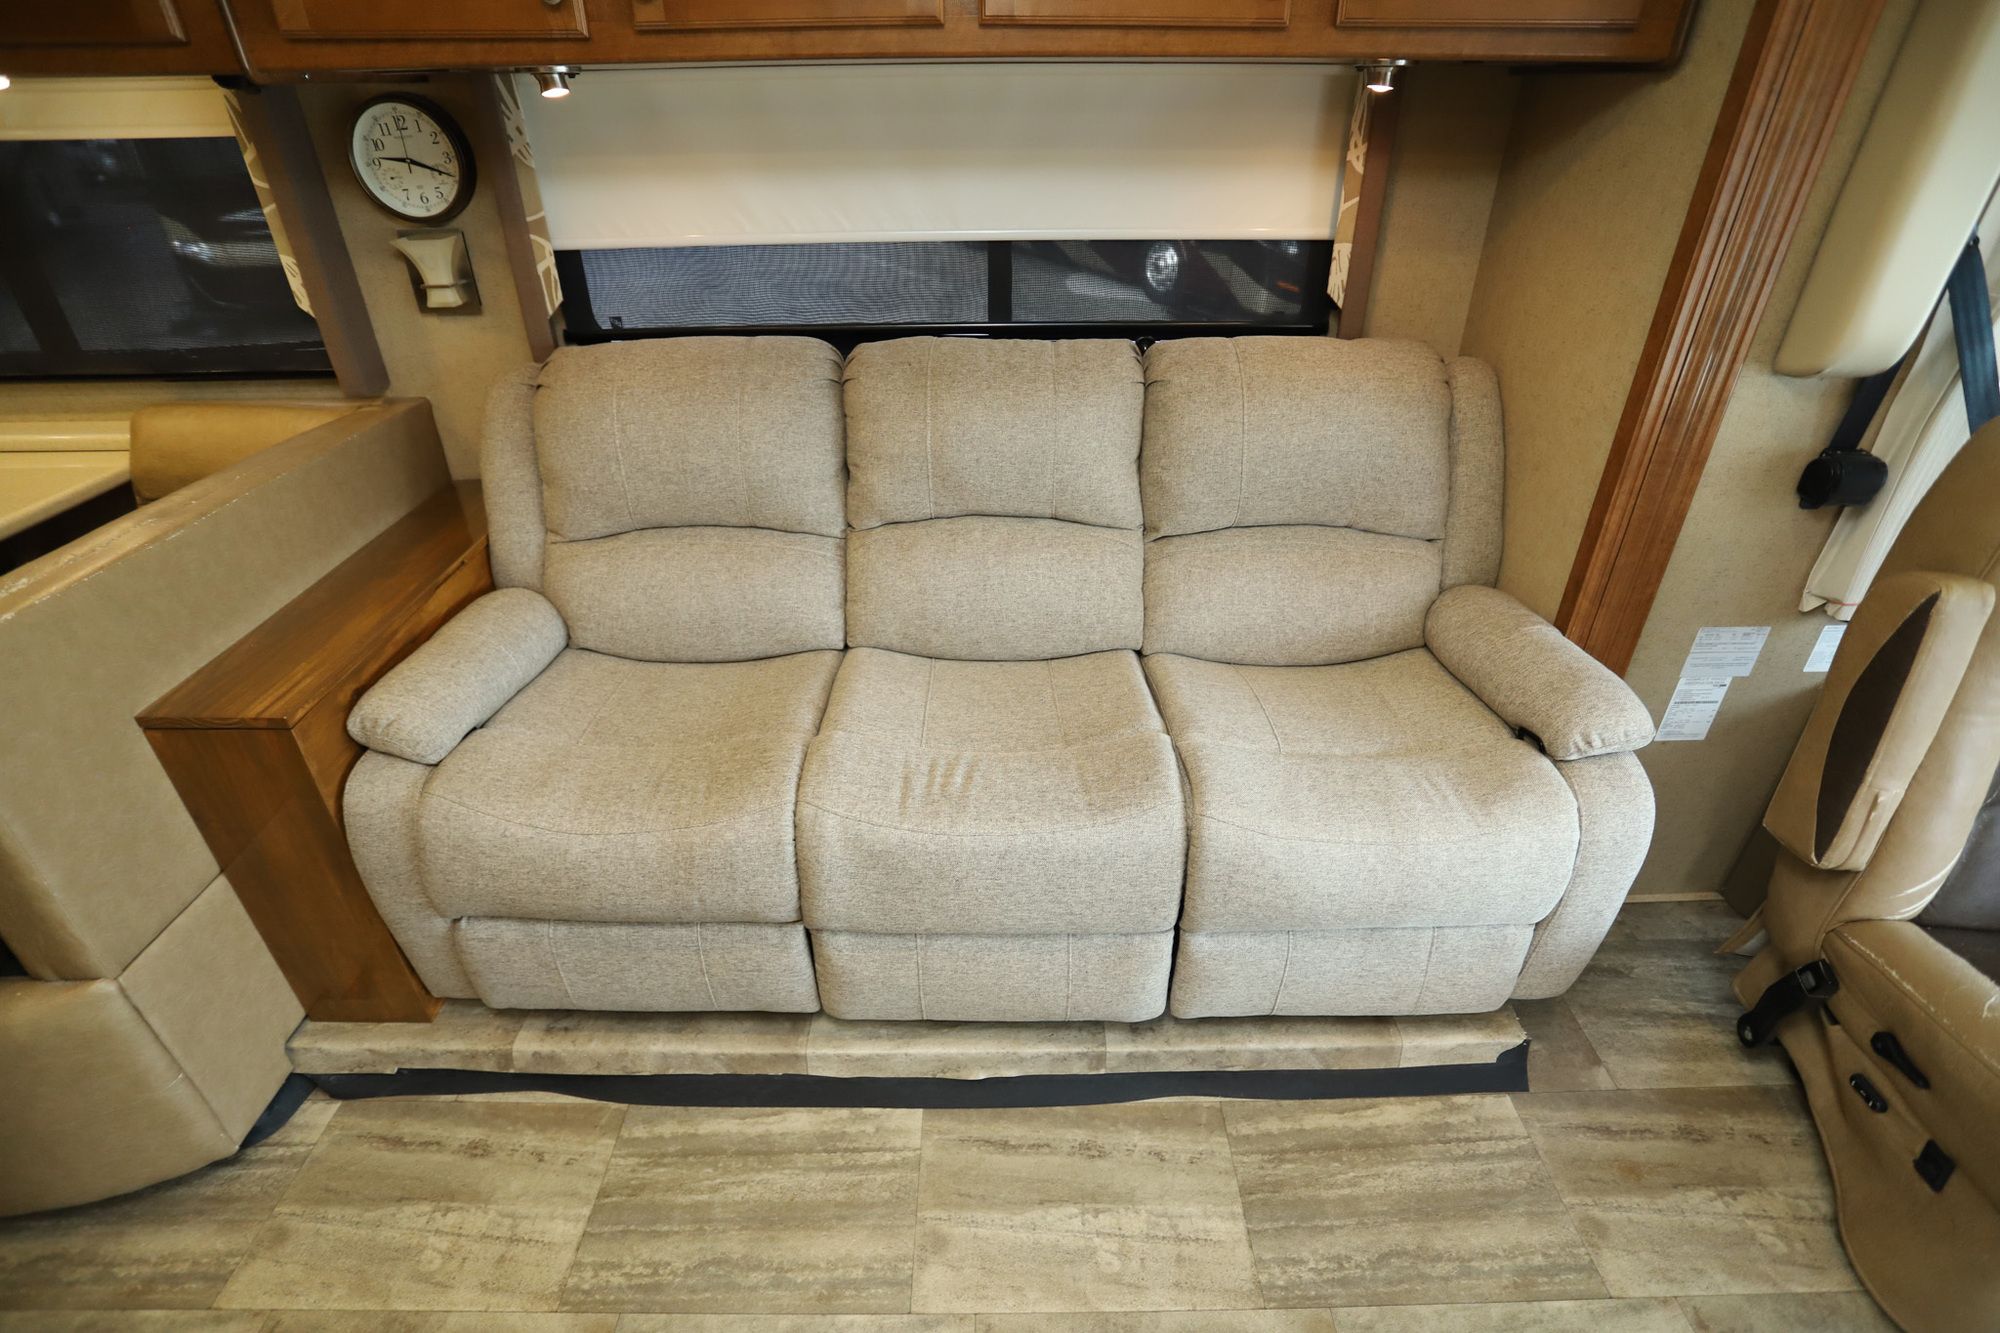 Used 2015 Thor Palazzo 36.1 Class A  For Sale